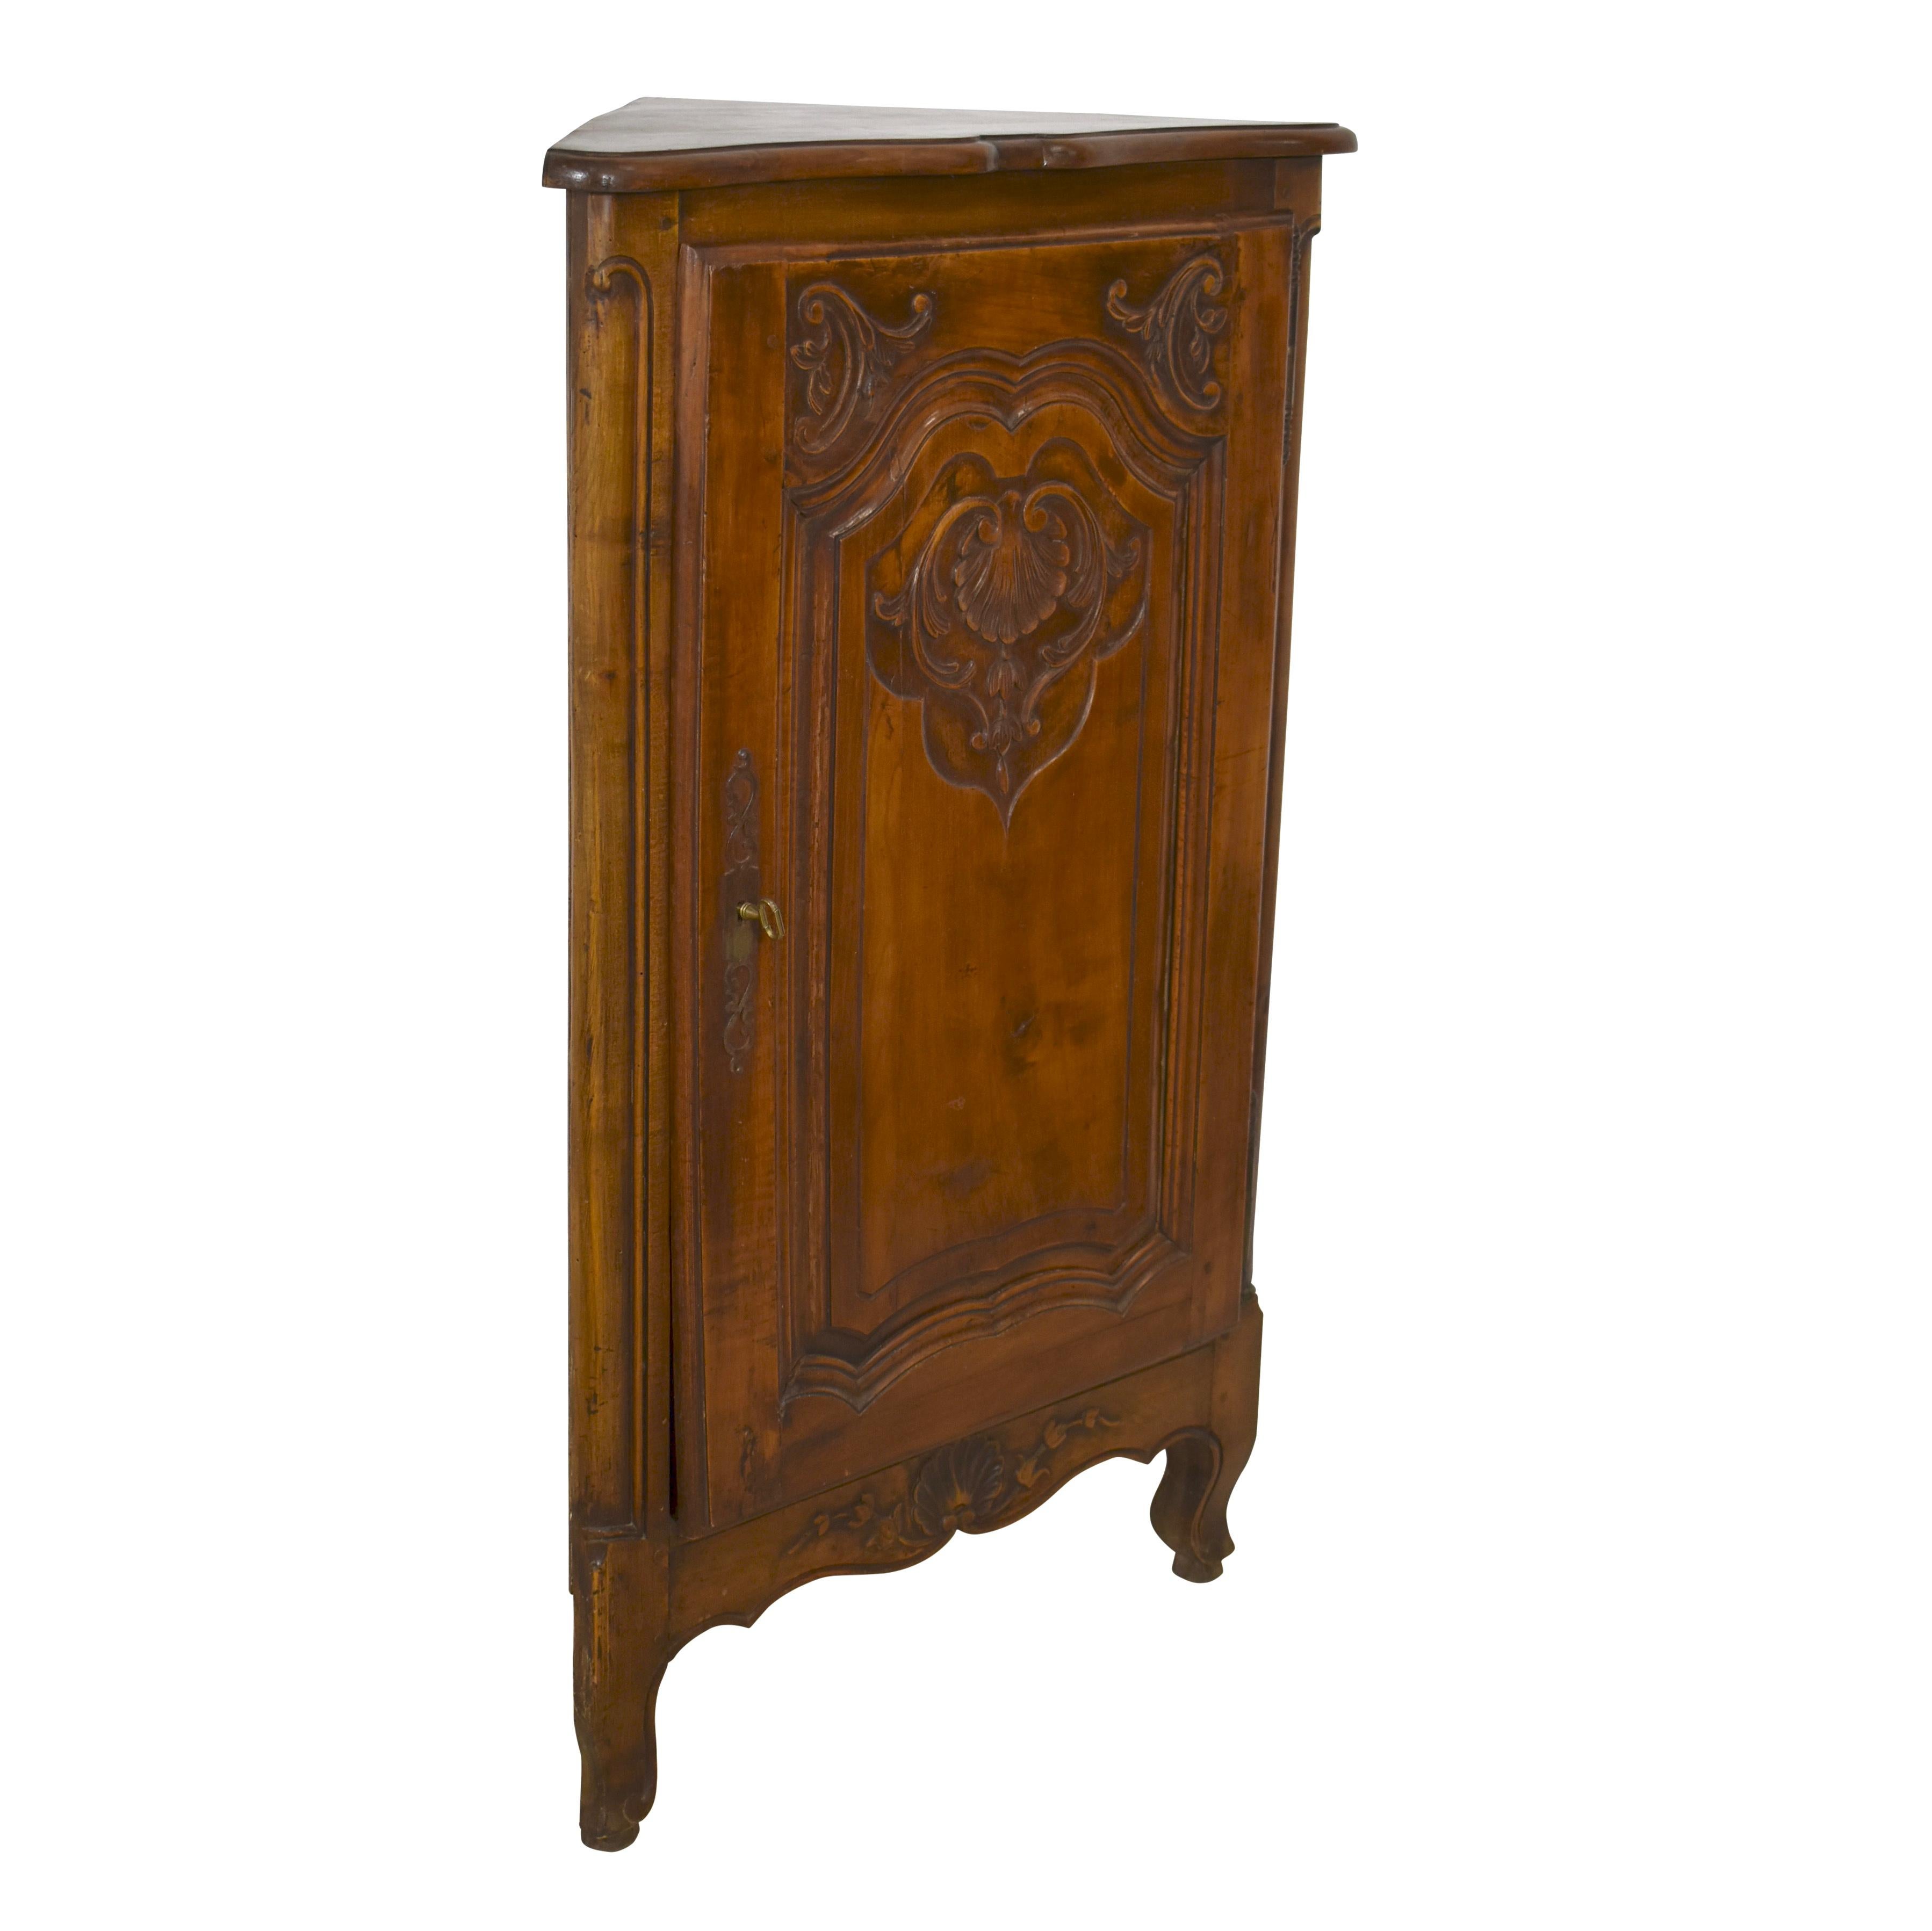 Featuring a Louis XV floral and shell motif, this petite corner cabinet showcases a small footprint and elegant design. The top front edge is beveled and scalloped. An arched raised panel door with a scalloped base reflects the scalloped apron